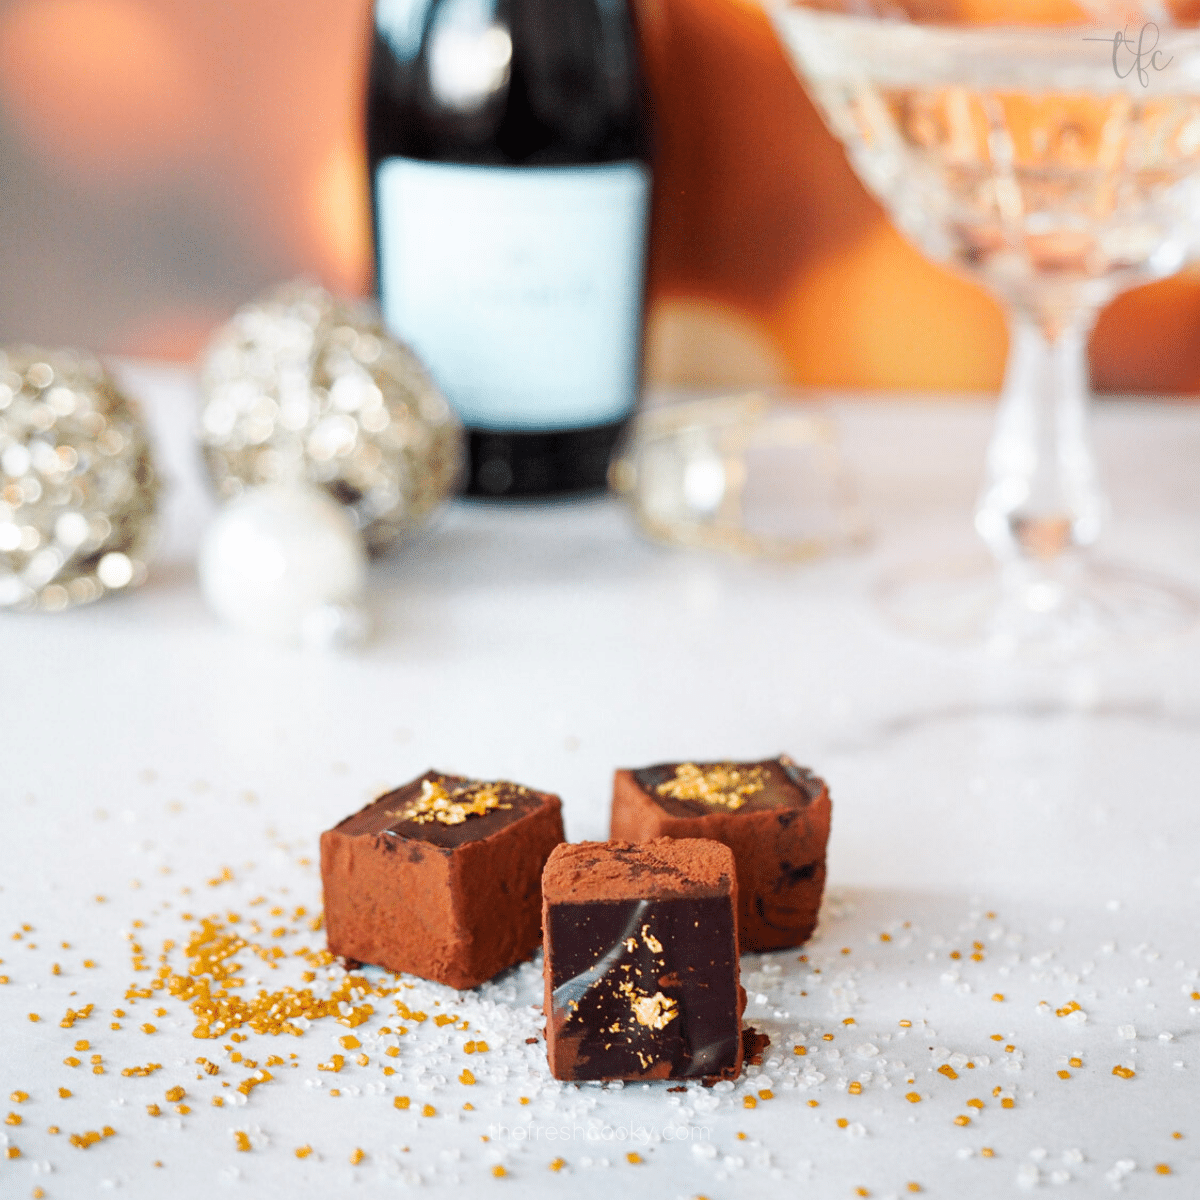 Champagne Truffles covered in a little gold leaf, with champagne bottle in the background, crystal glass and ornaments.